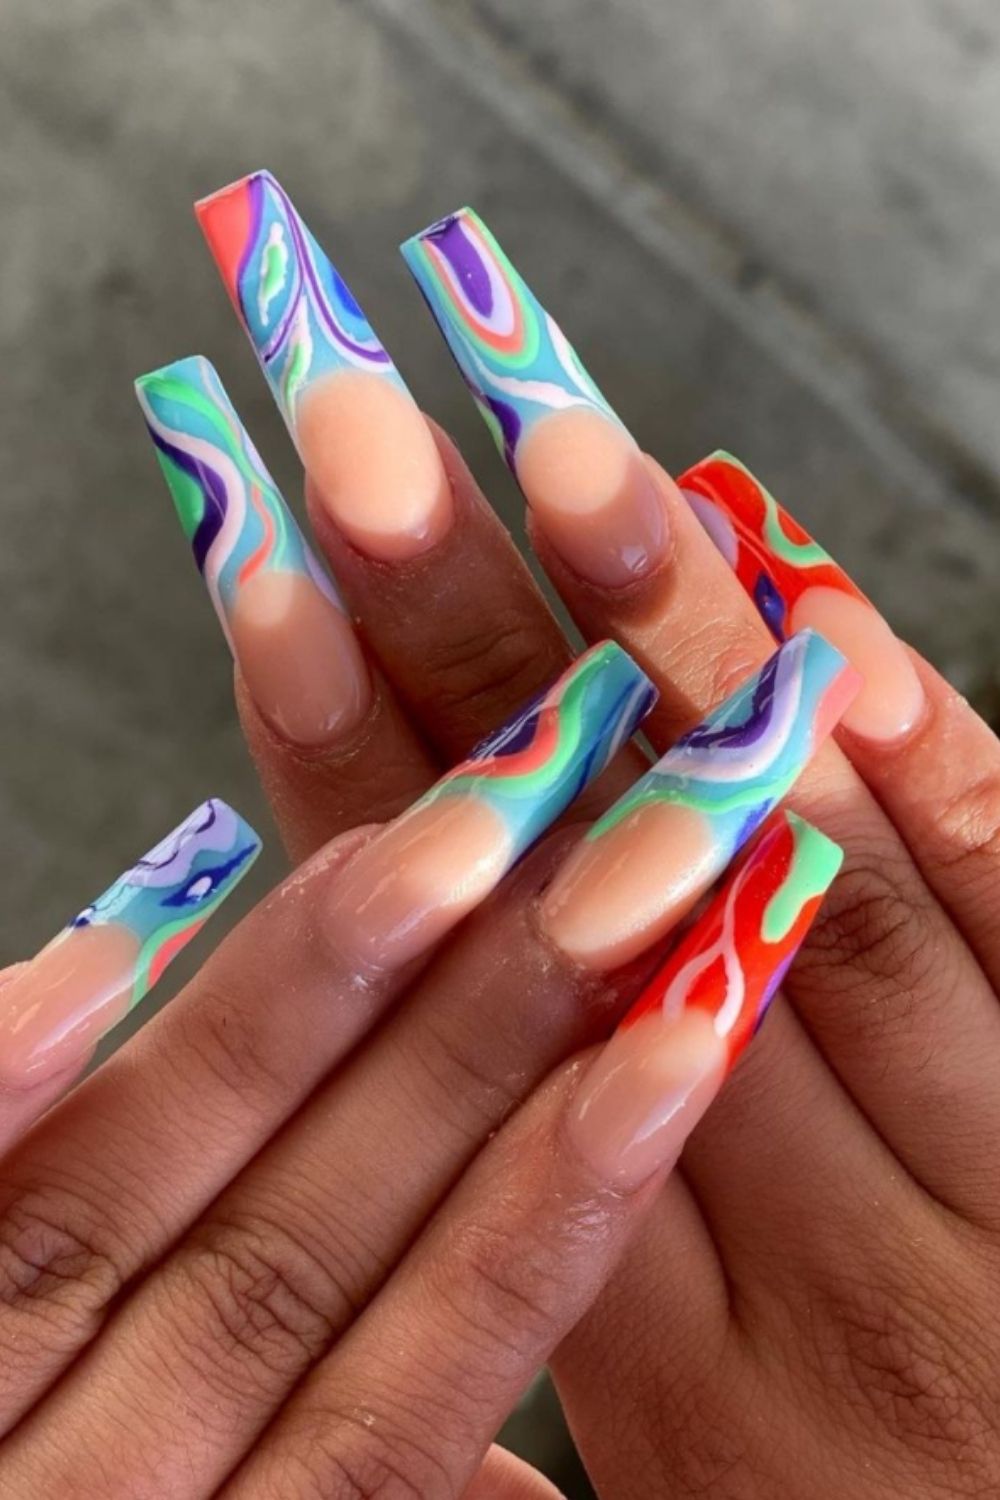 French Acrylic Nails: 40 Modern Nail Designs You Should Try!